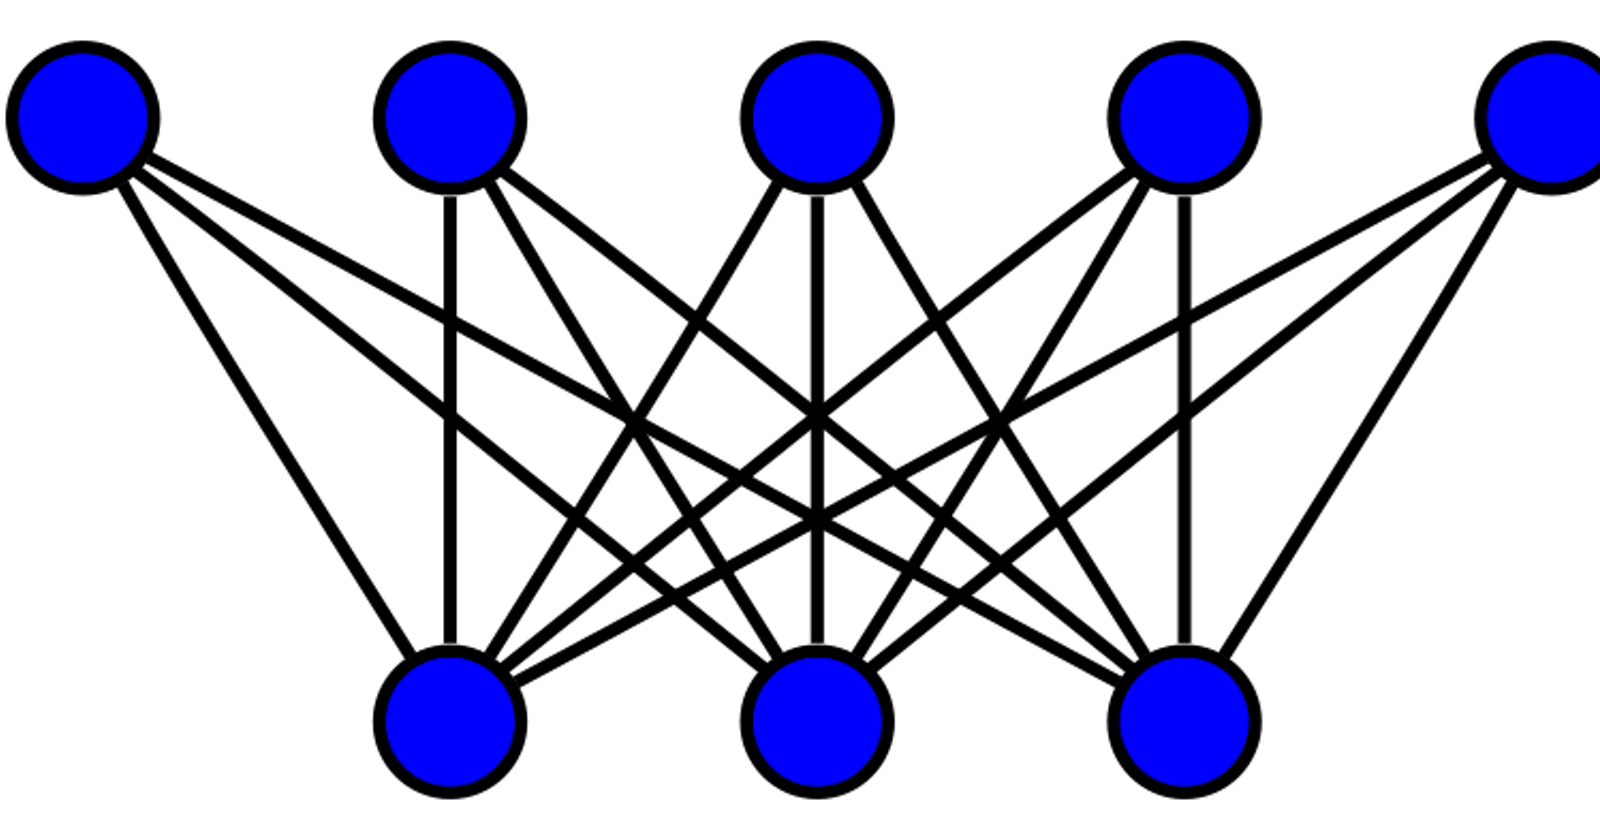 Is Graph Bipartite?